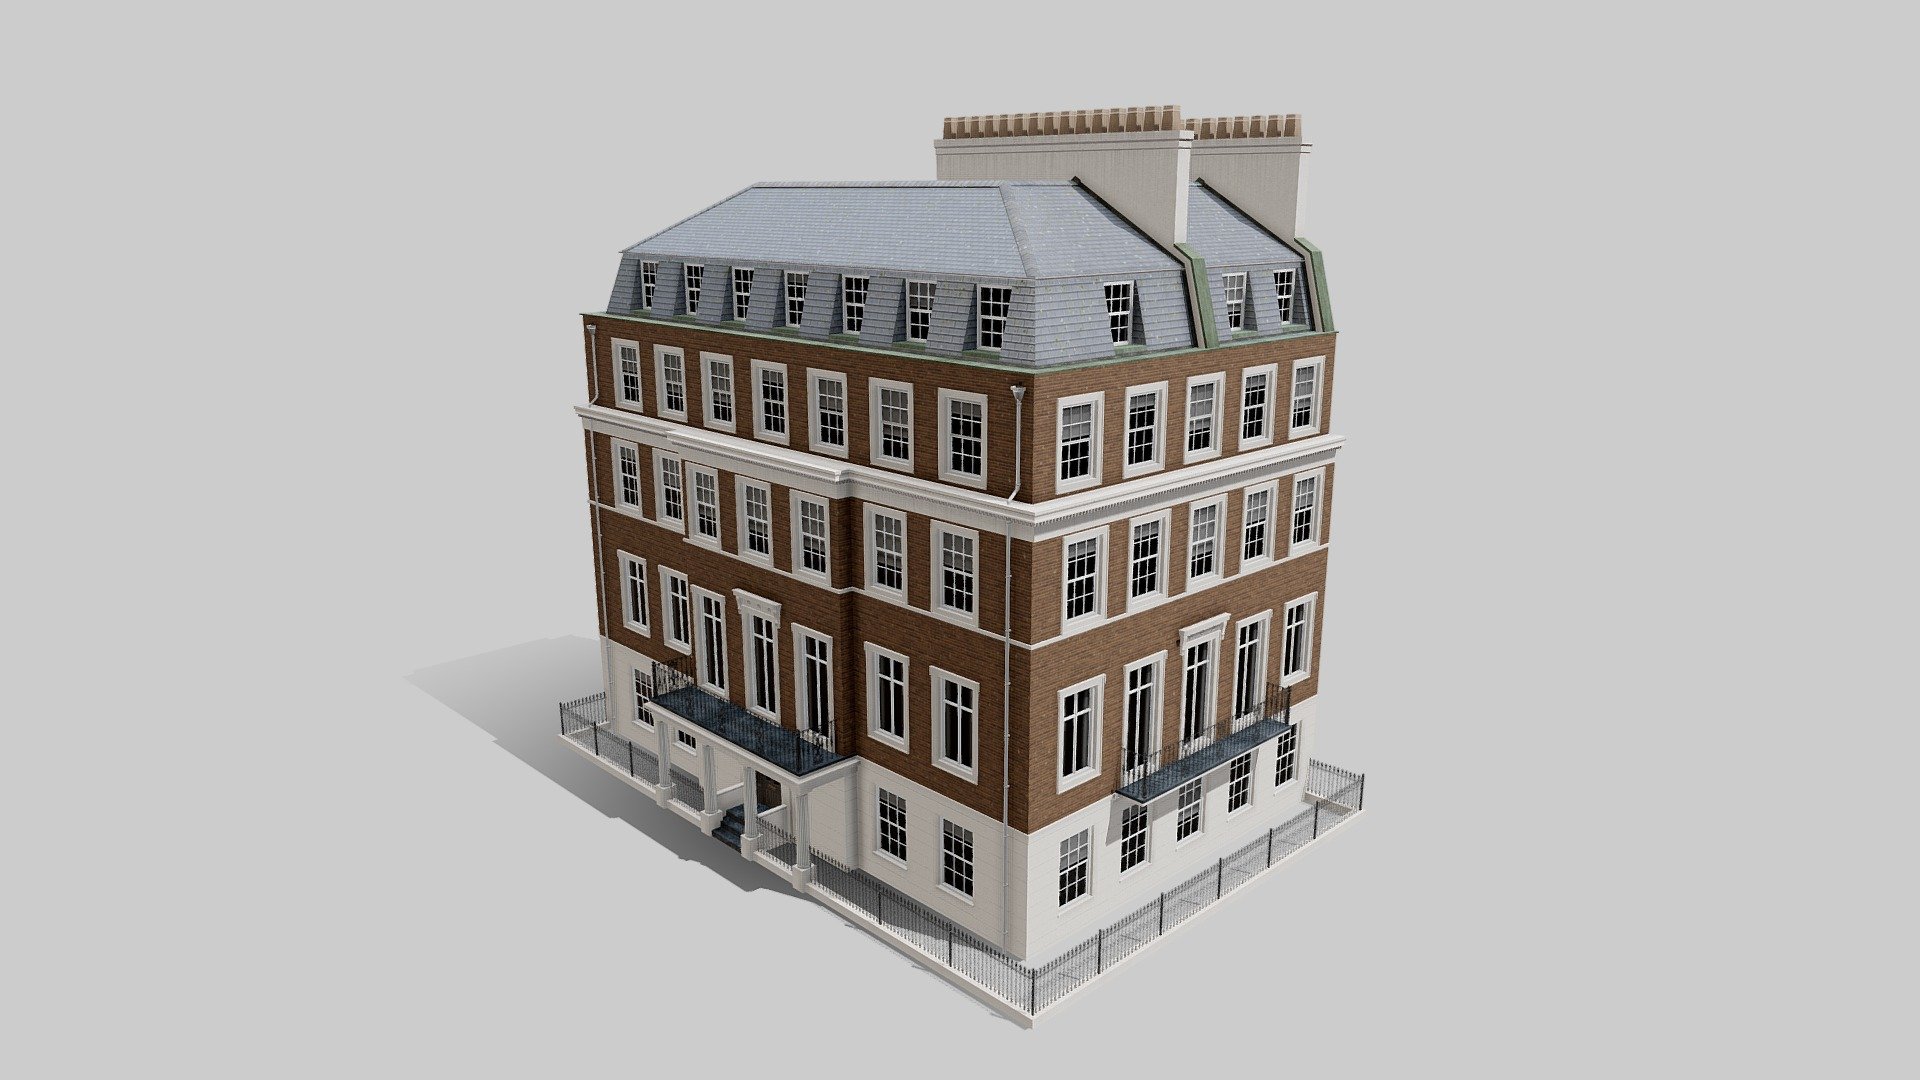 A grand 19th century corner terrace with brick facade from the affluent Central London district of Belgravia.

The textures have been created in Substance Painter and Designer specifcally for this model to give it a high quality, realistic look 3d model